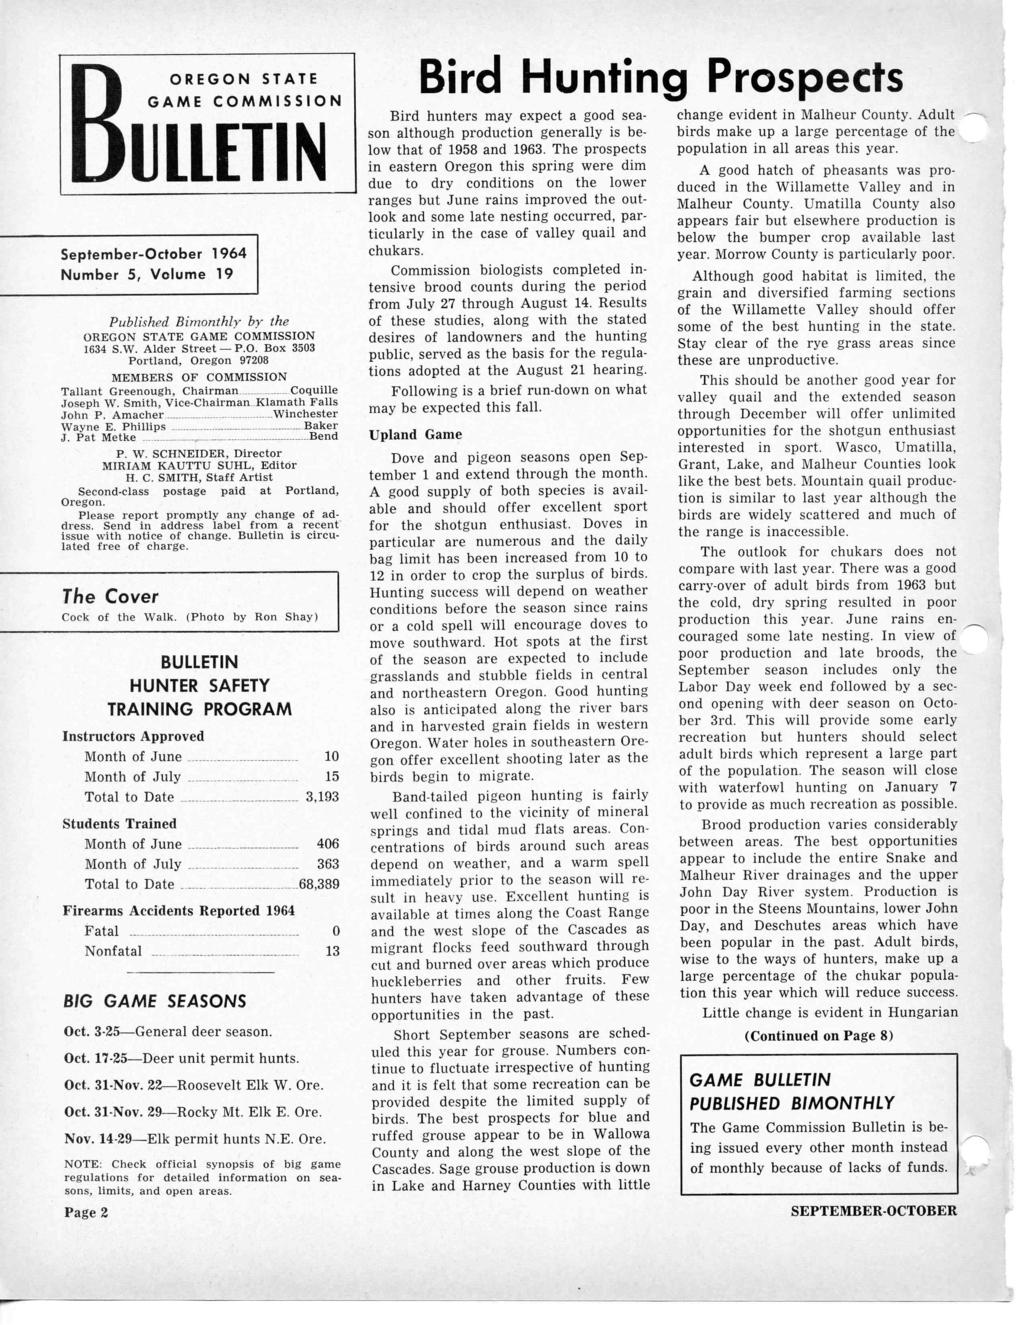 OREGON STATE GAME COMMISSION ULLETIN September-October 1964 Number 5, Volume 19 Published Bimonthly by the OREGON STATE GAME COMMISSION 1634 S.W. Alder Street P.O. Box 3503 Portland, Oregon 97208 MEMBERS OF COMMISSION Tallant Greenough, Chairman Coquille Joseph W.